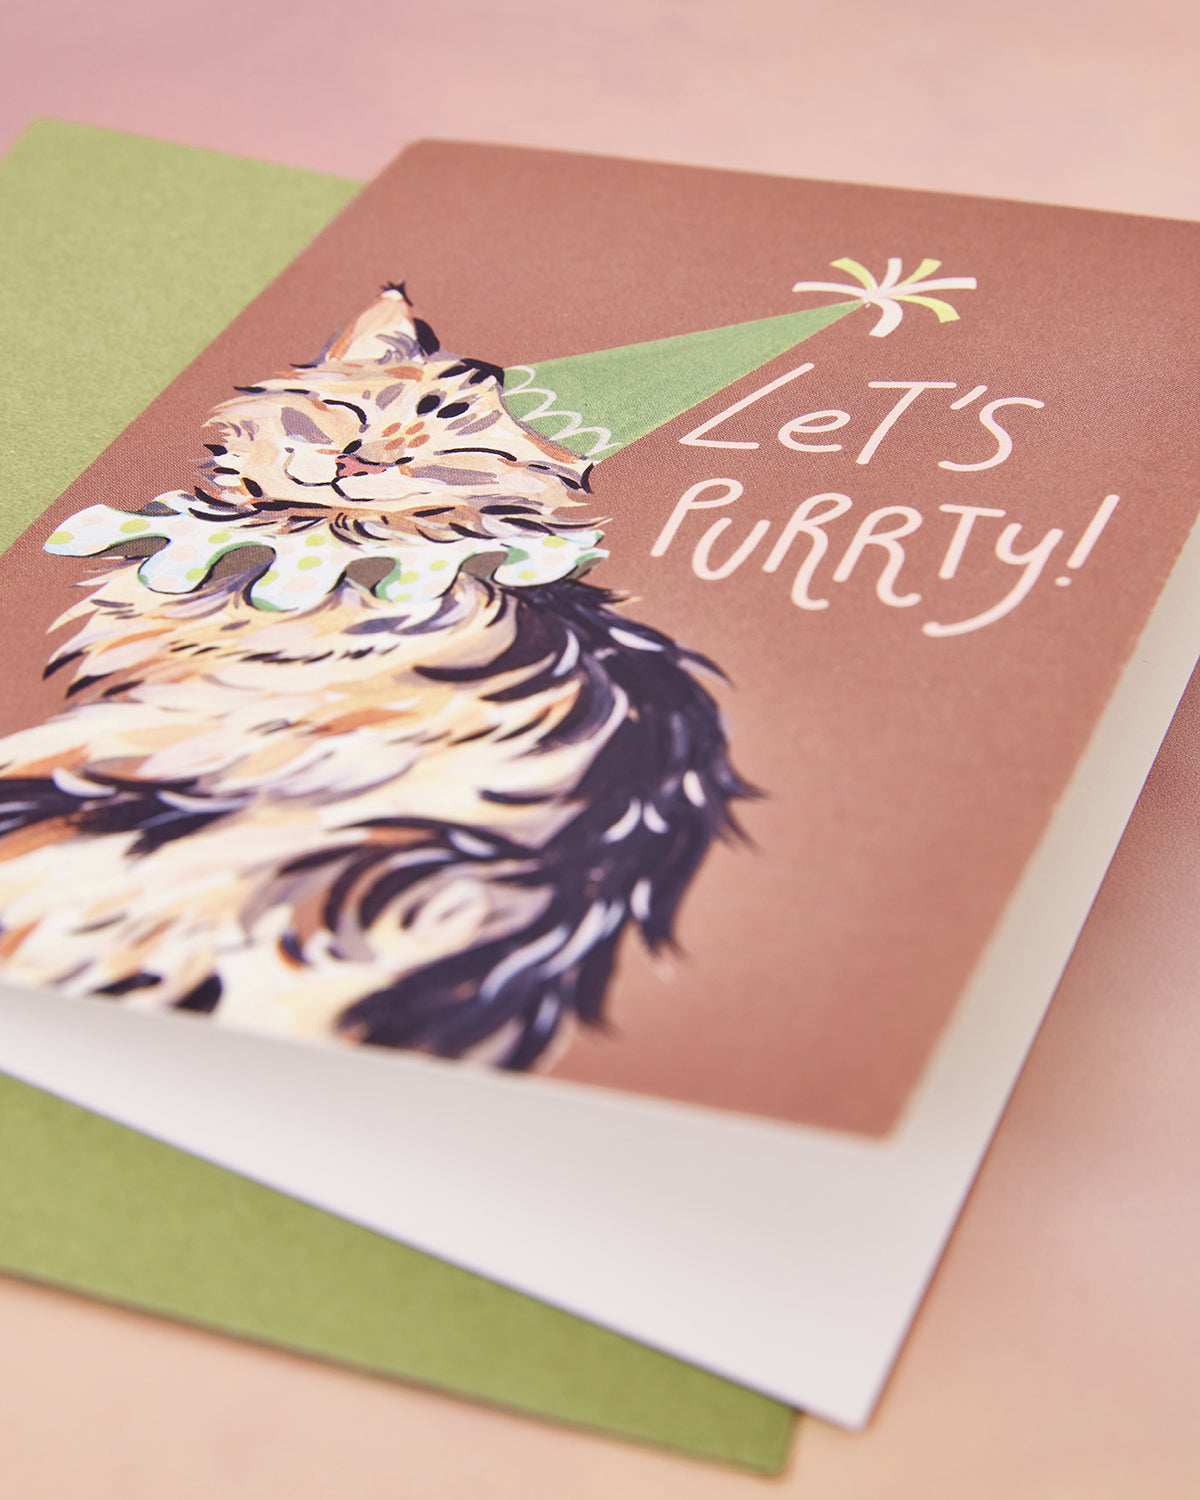 Let's Purrty Cat Birthday Card